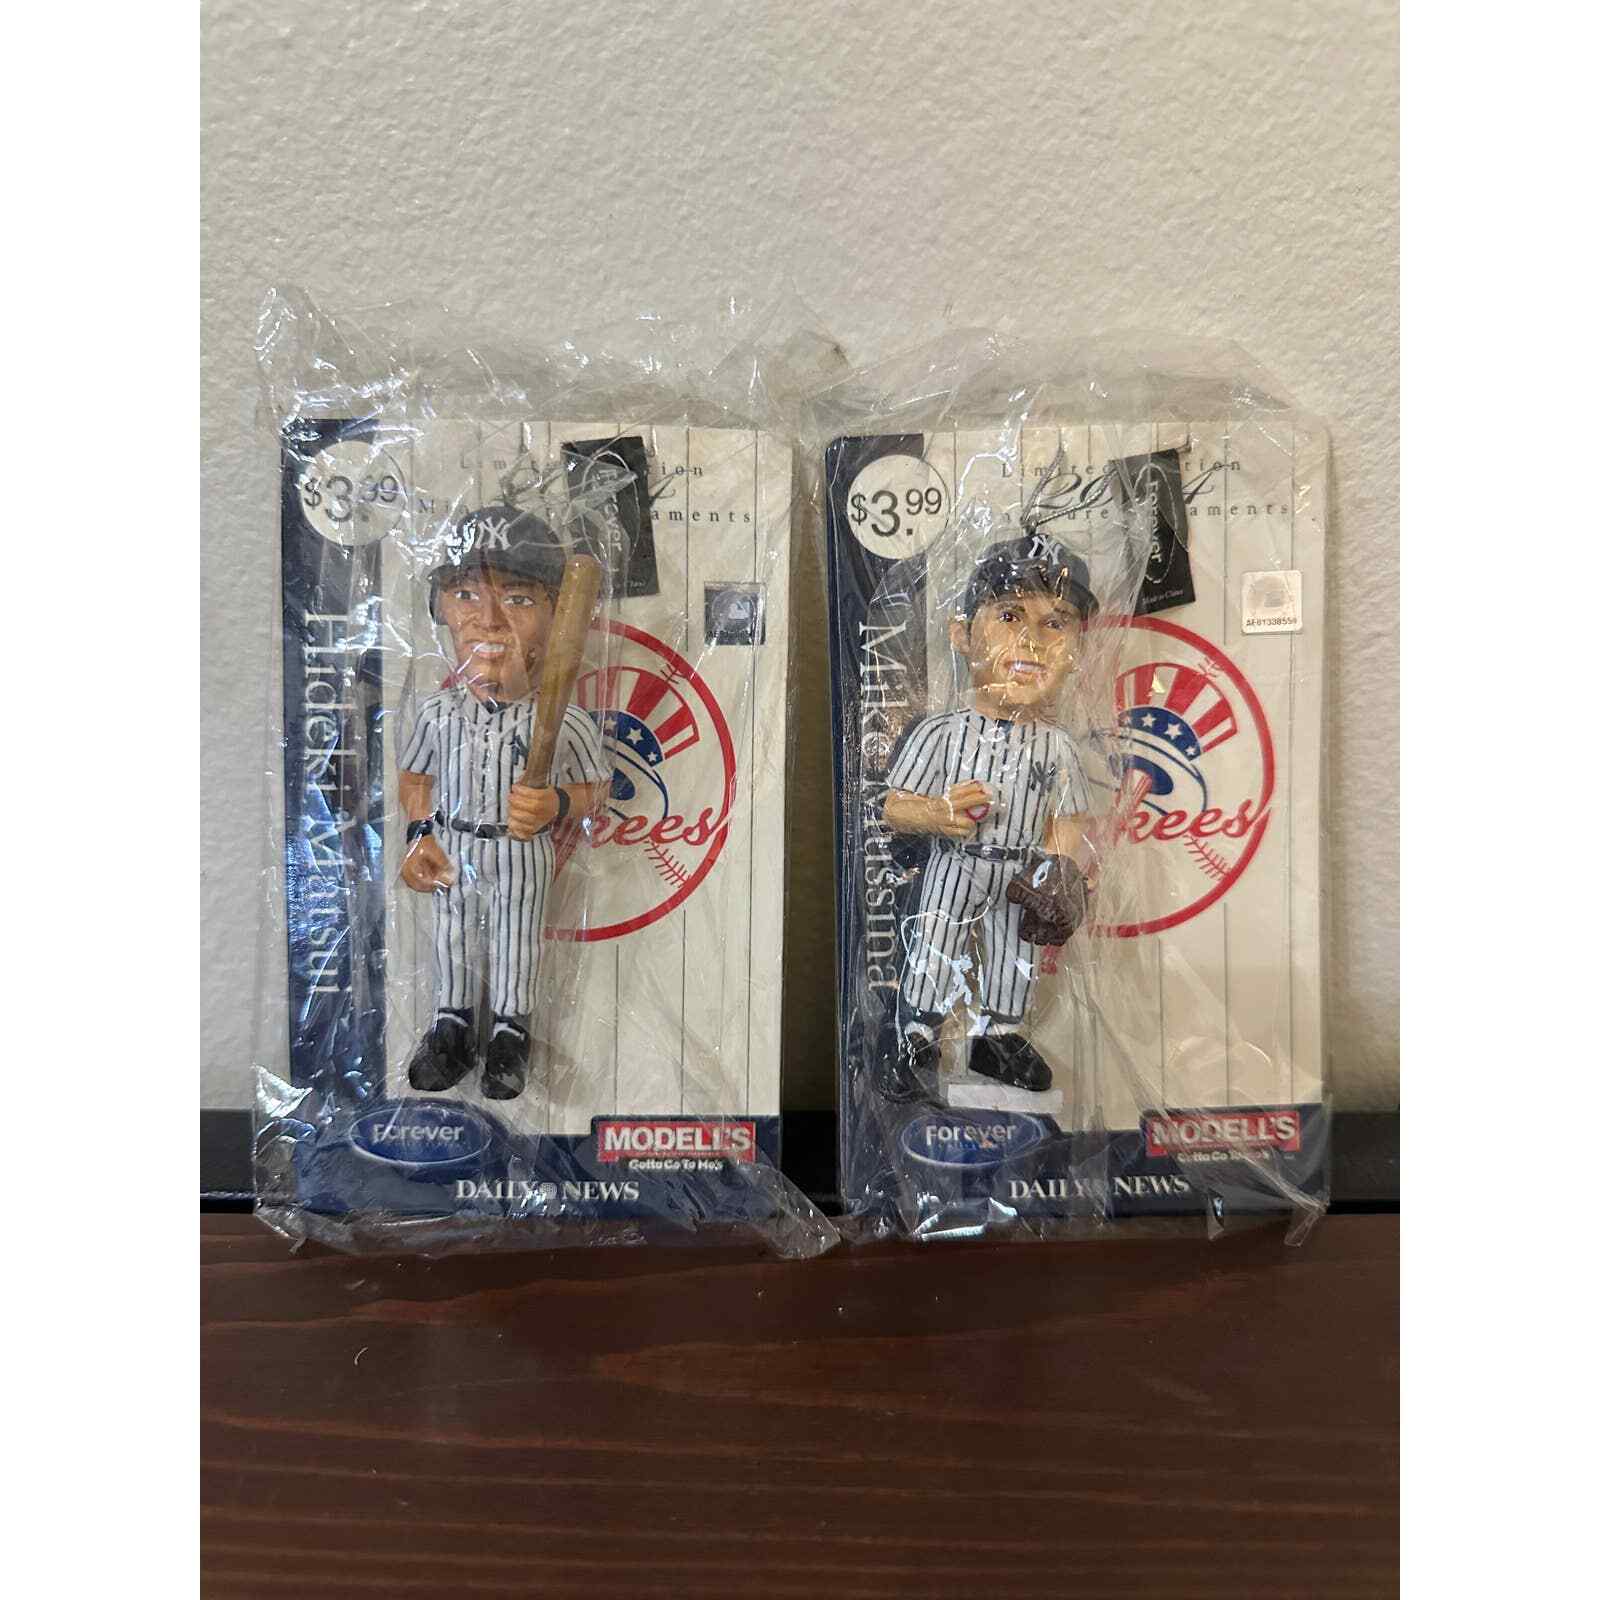 FOREVER Collectibles Limited Edition 2004 Ornaments Mike Mussina/Hideki Matsui